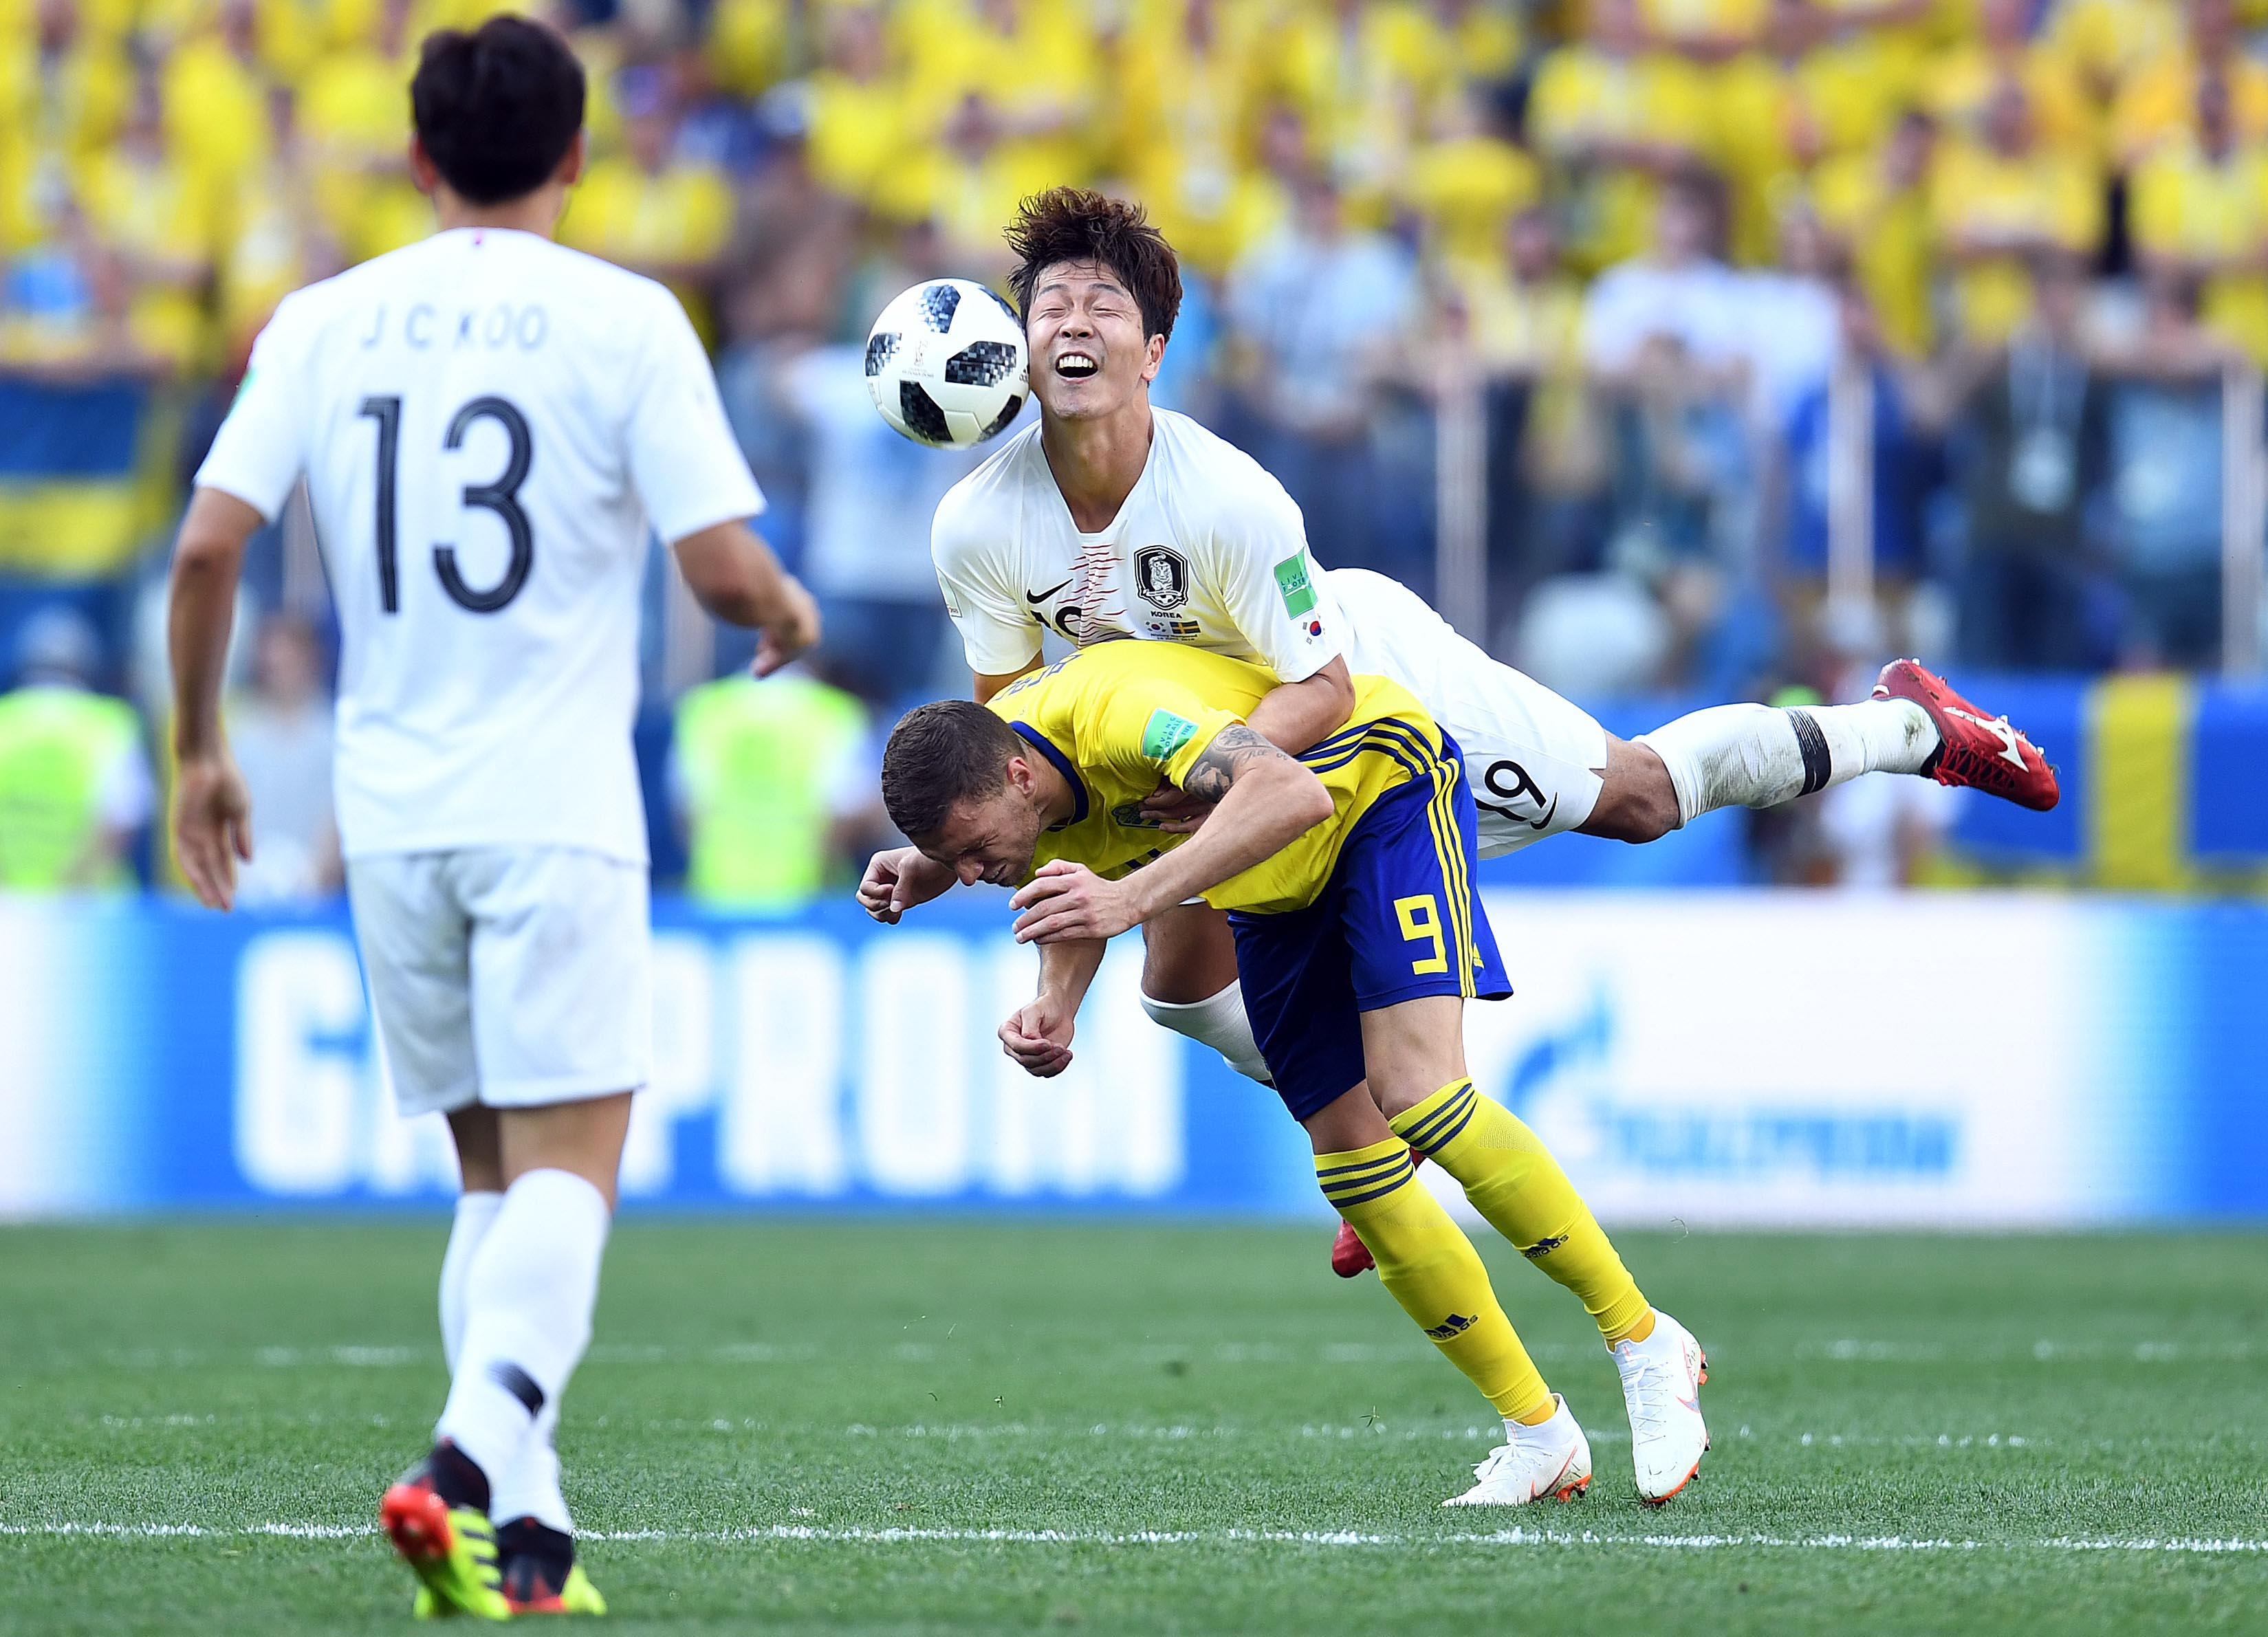 South Korea forward Kim Young-gwon and Sweden forward Marcus Berg go for the ball during the second half in Group F play during the FIFA World Cup 2018 at Nizhny Novgorod Stadium in Nizhny Novgorod, Russia.